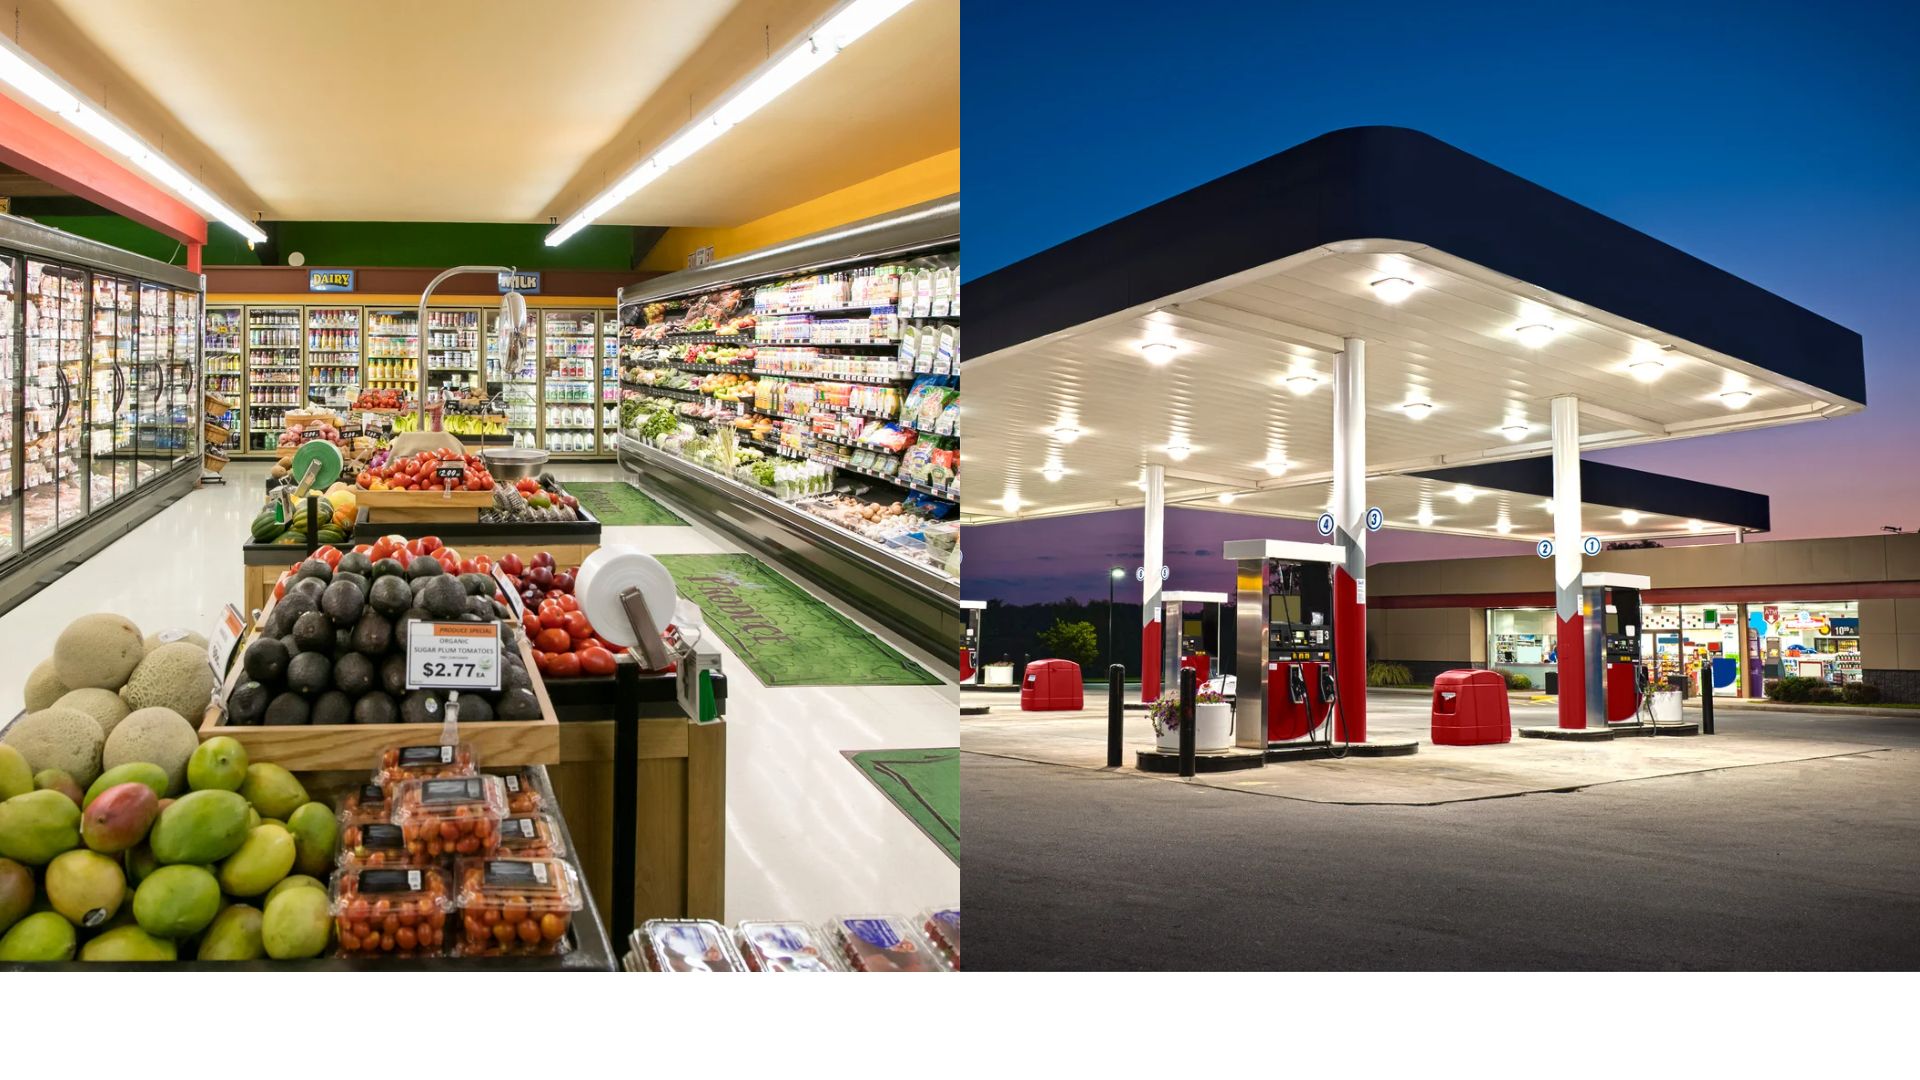 grocery & gas station is one of the industries where Eazy Return Provides pickup services